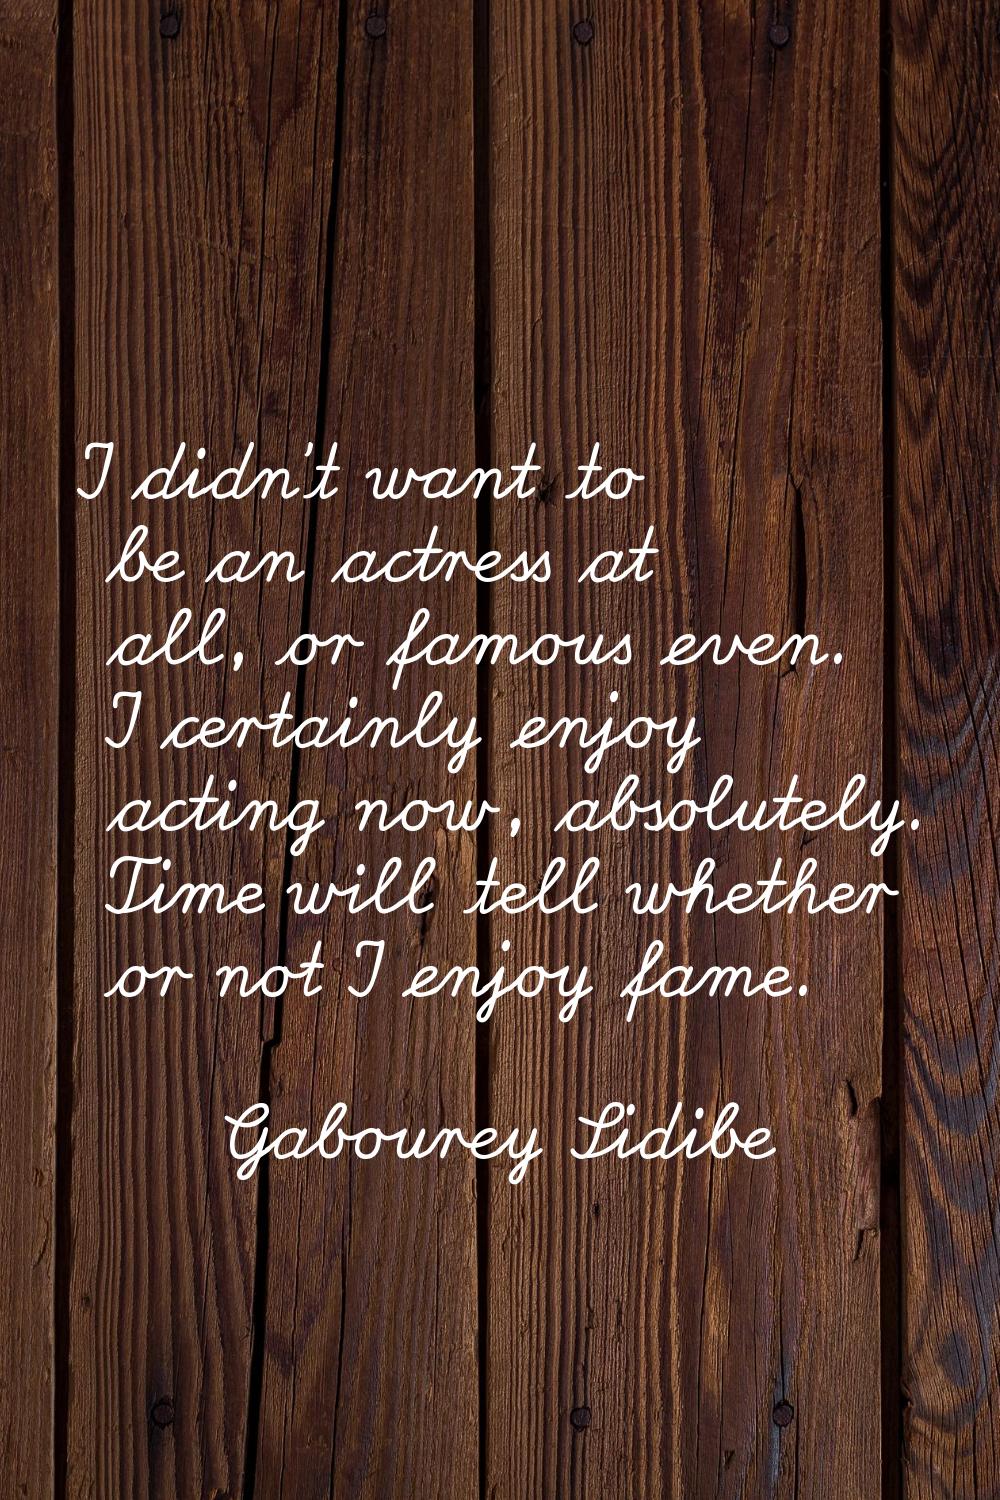 I didn't want to be an actress at all, or famous even. I certainly enjoy acting now, absolutely. Ti